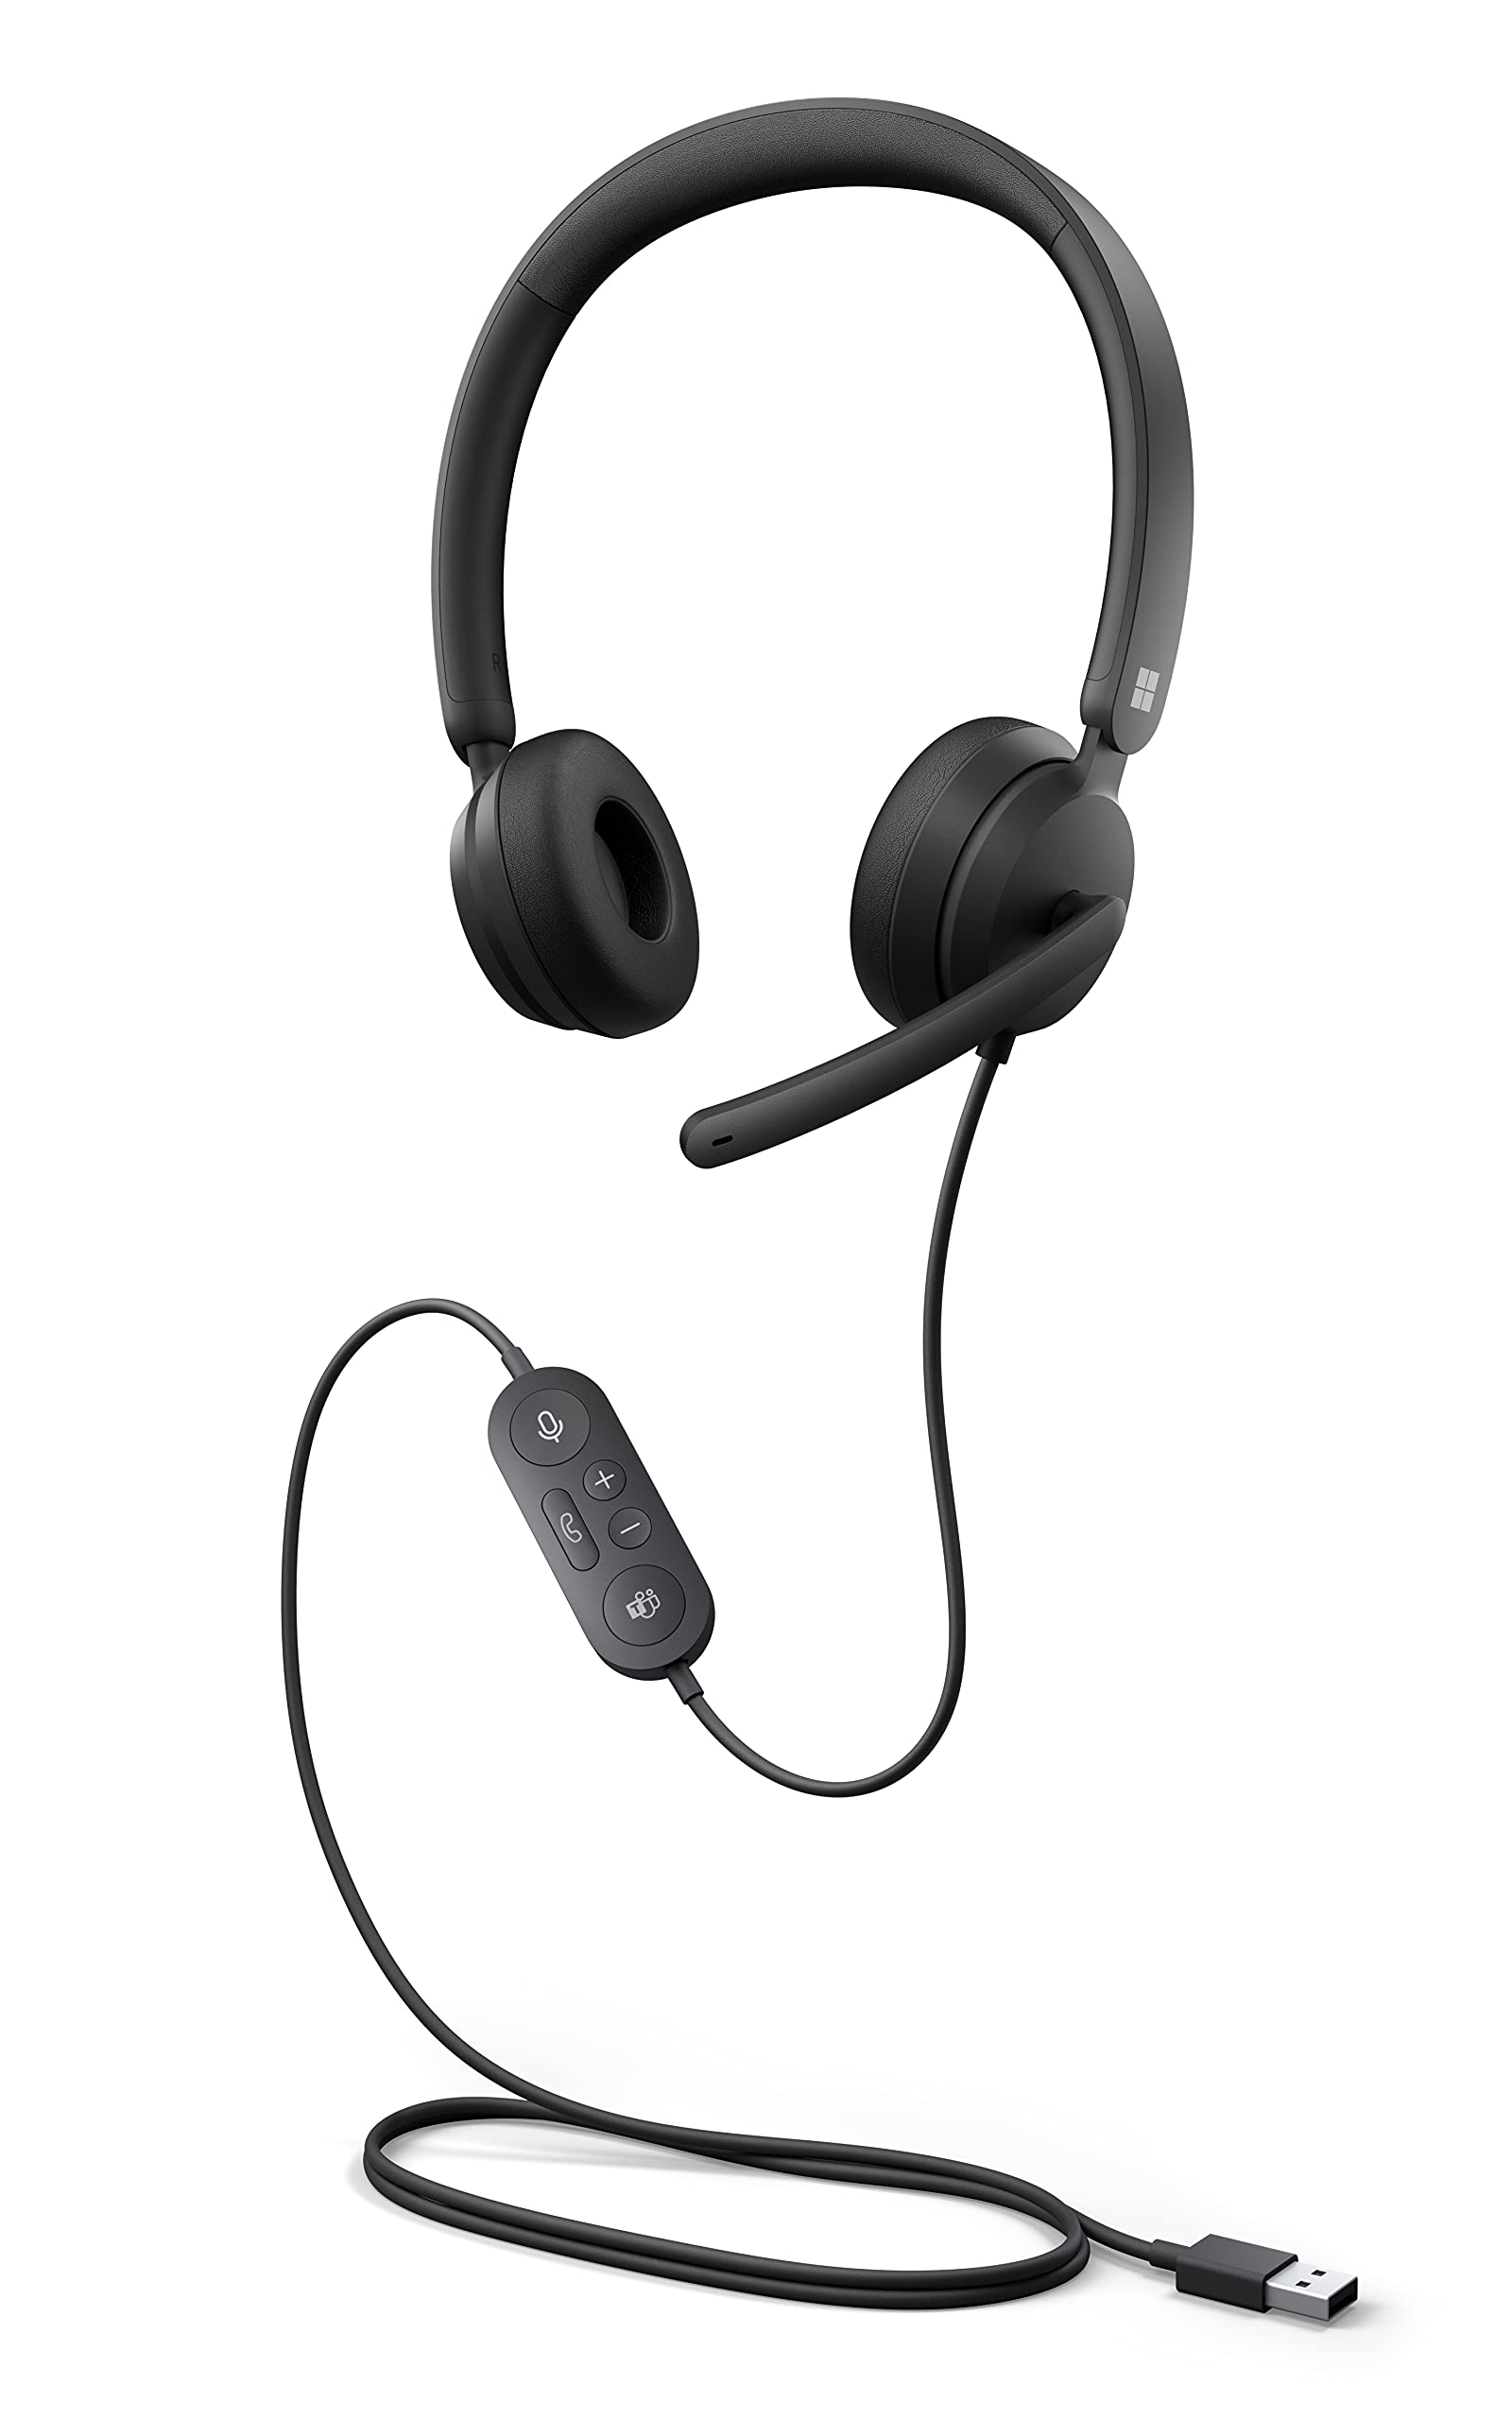 Microsoft Modern USB Headset - Wired Headset, On-Ear Stereo Headphones with Noise-Cancelling Microphone, USB-A Connectivity, In-Line Controls, PC/Mac/Laptop - Certified for Microsoft Teams